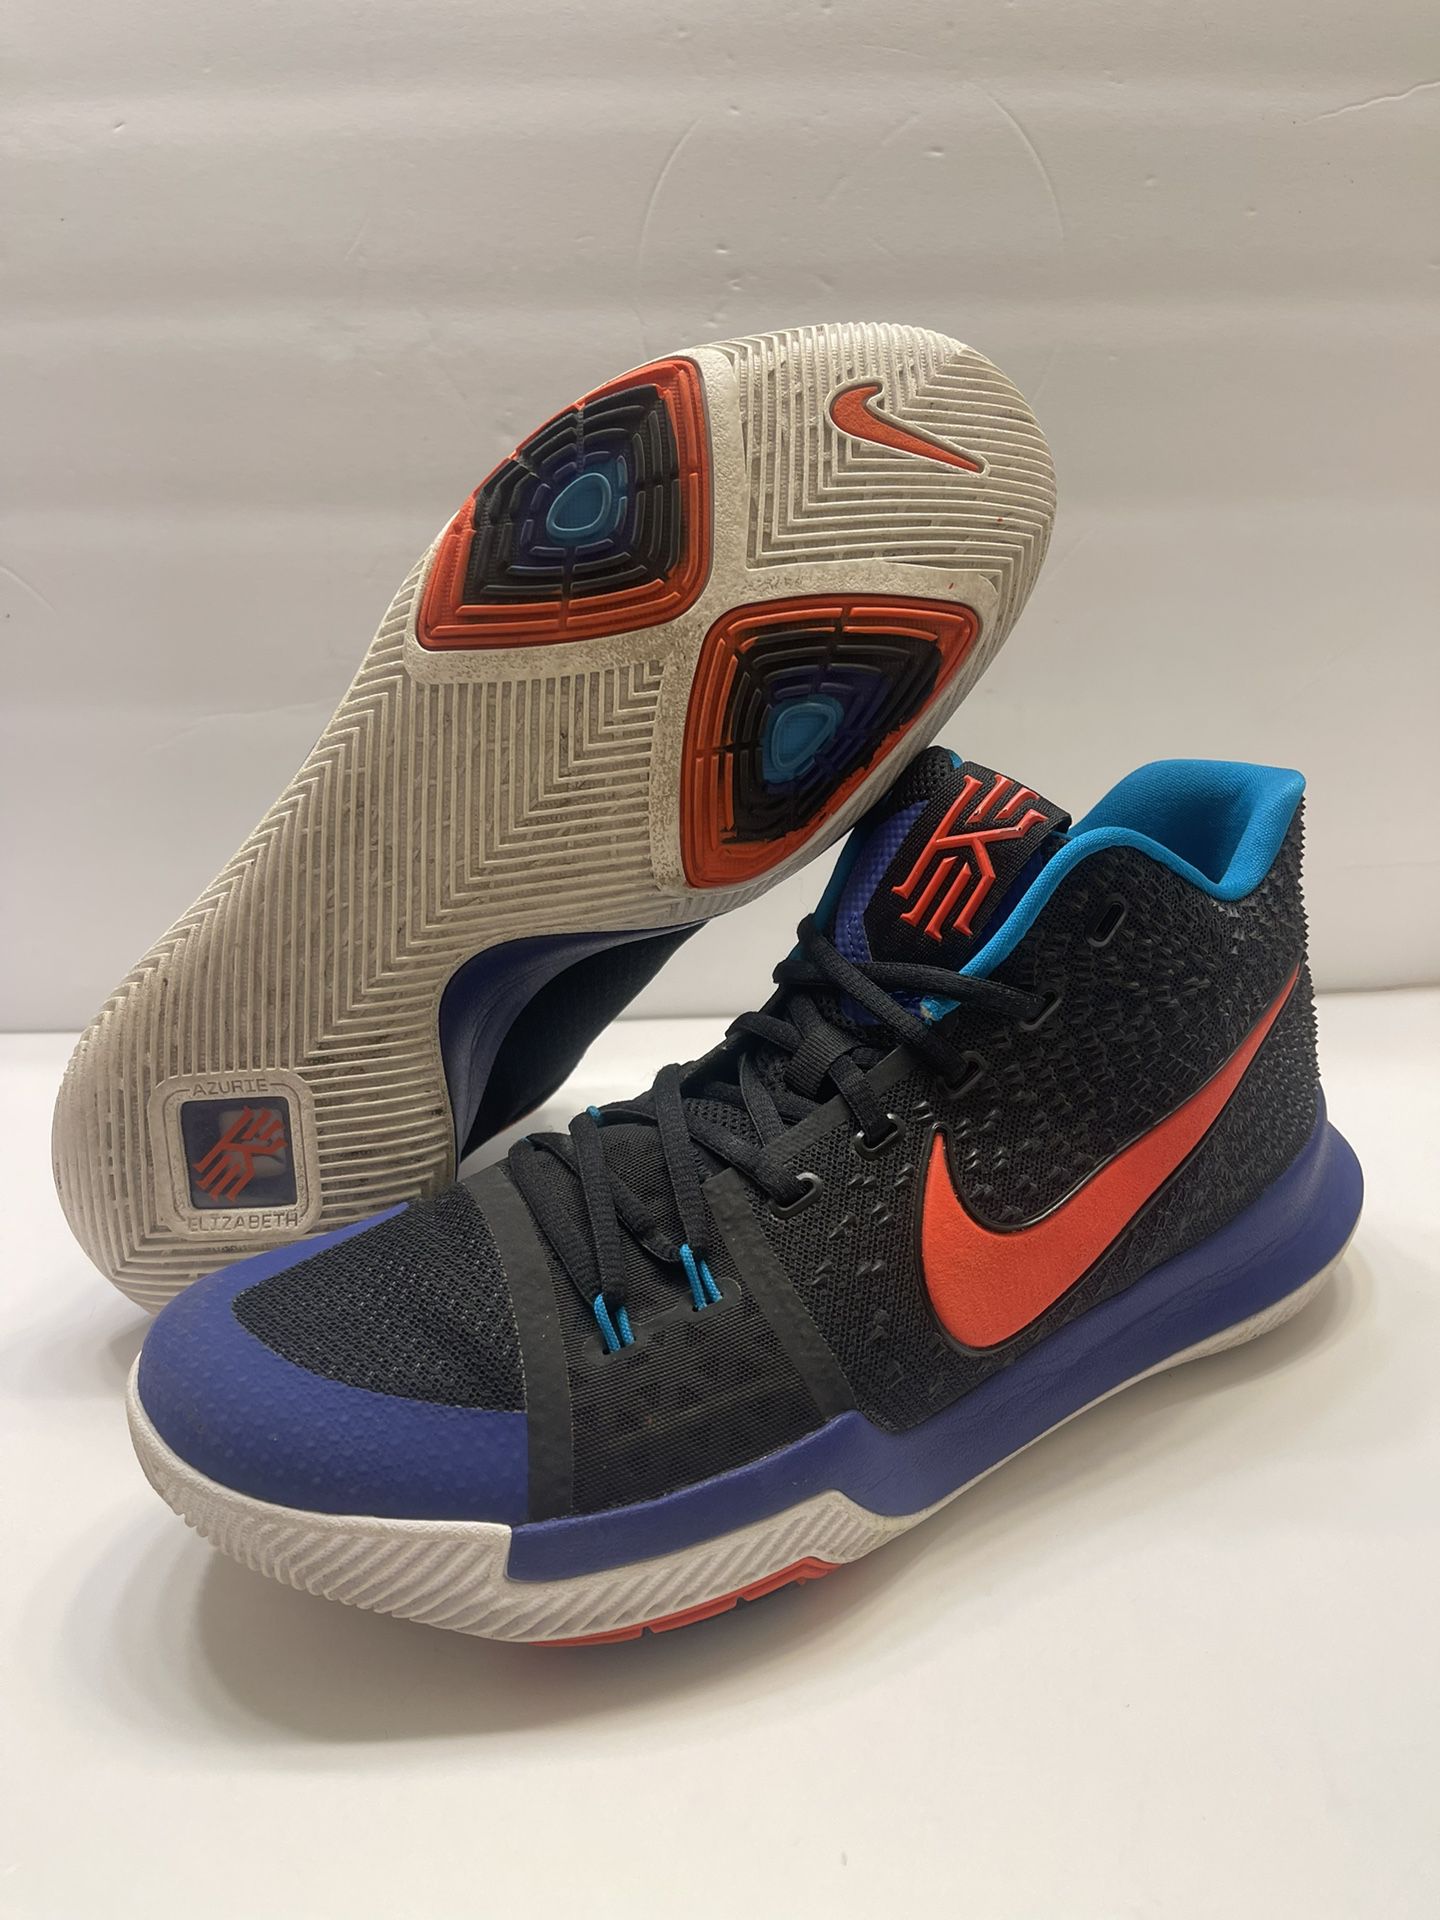 Asesino resistirse italiano Nike Kyrie Irving 3 Kyrache Light 2017 Men's Size 11.5 (852395-007) for  Sale in Saint Paul, MN - OfferUp